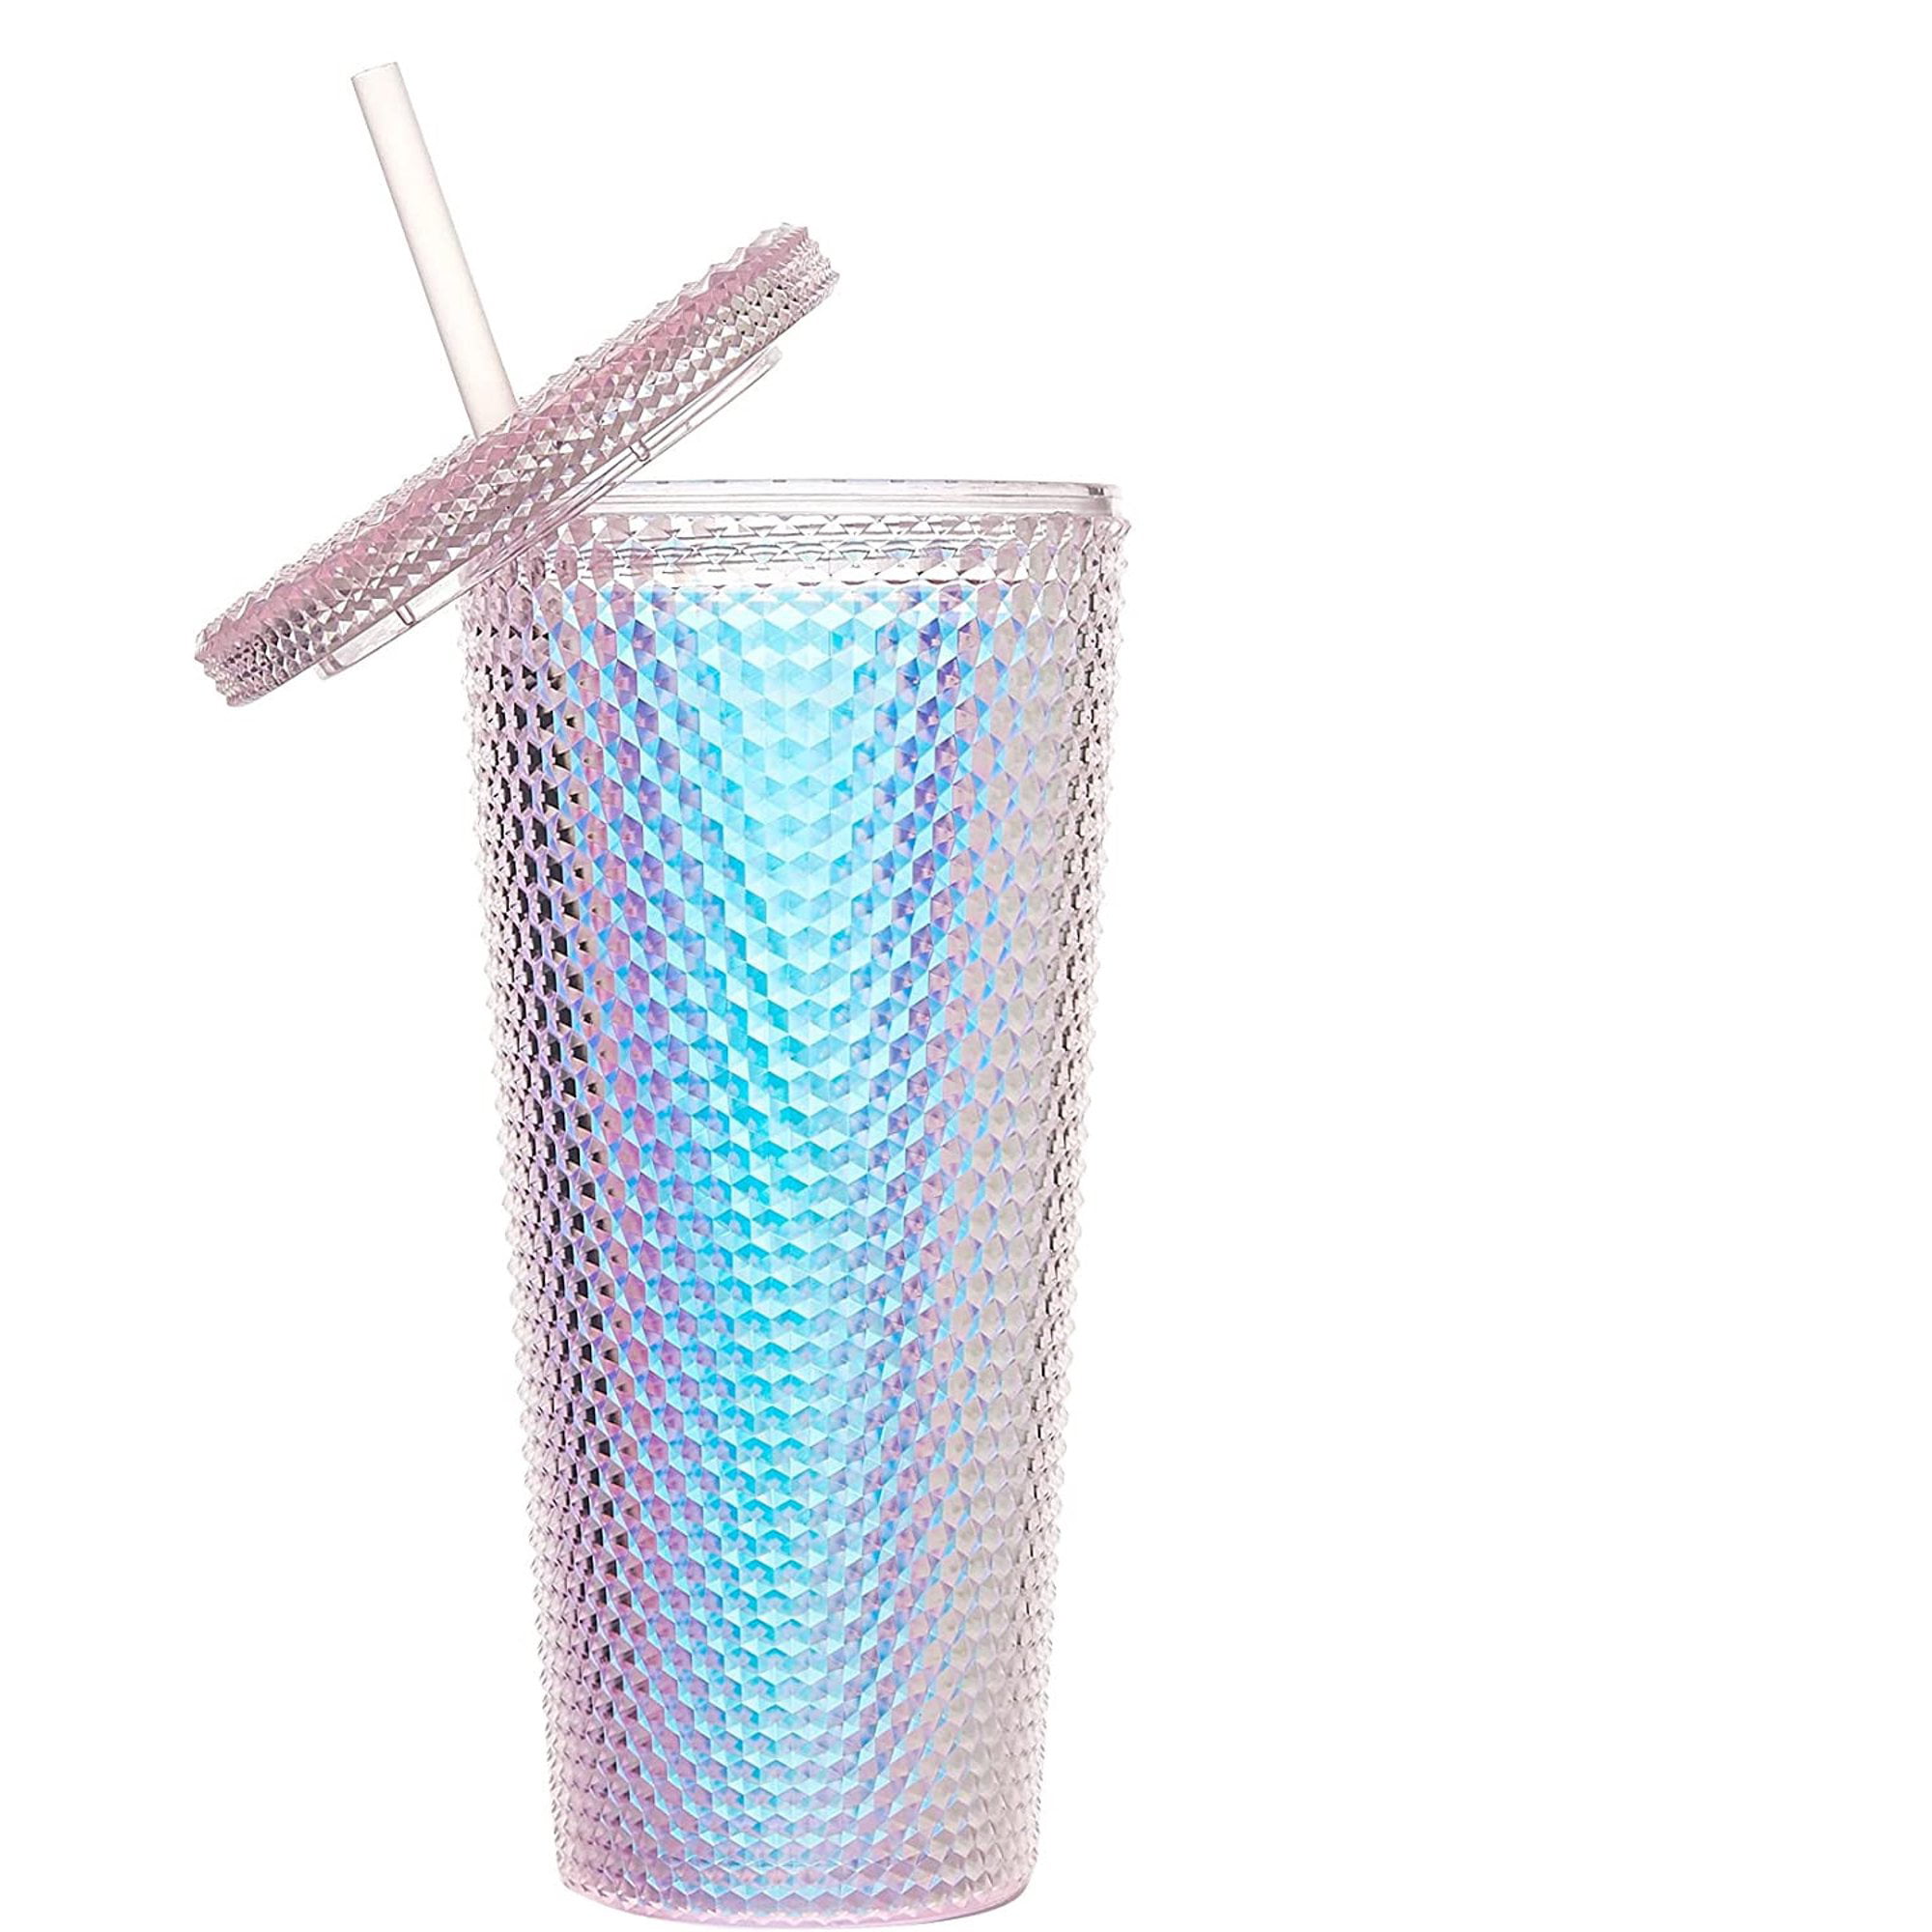 QWEZXO Colorful High Borosilicate Glass Cups With Lids and Glass Straws，20  OZ Rainbow Iced Coffee Water Tumbler Smoothie